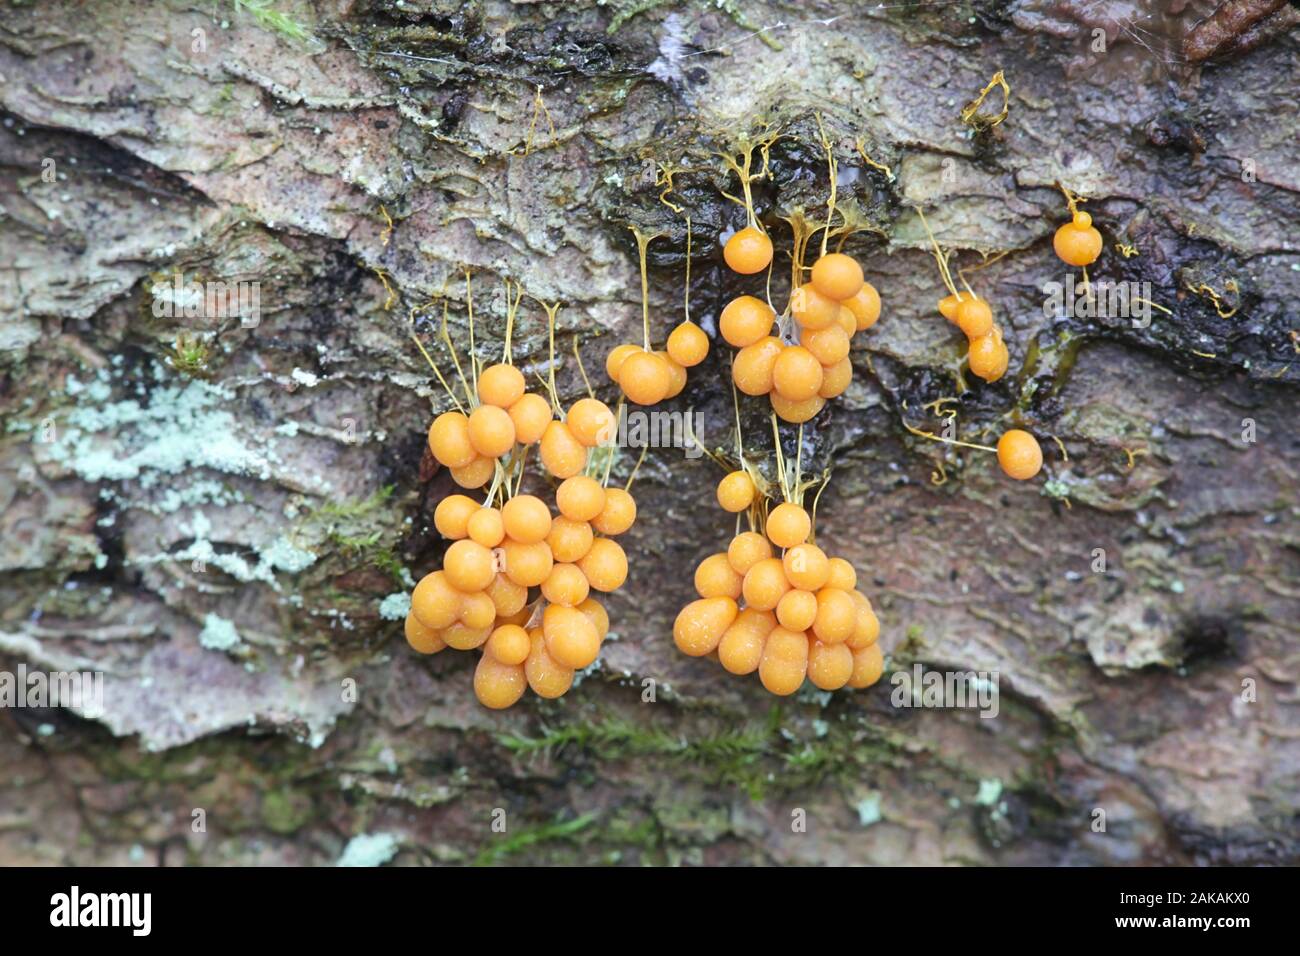 Badhamia utricularis, a slime mold with no common name, specimen from Finland Stock Photo